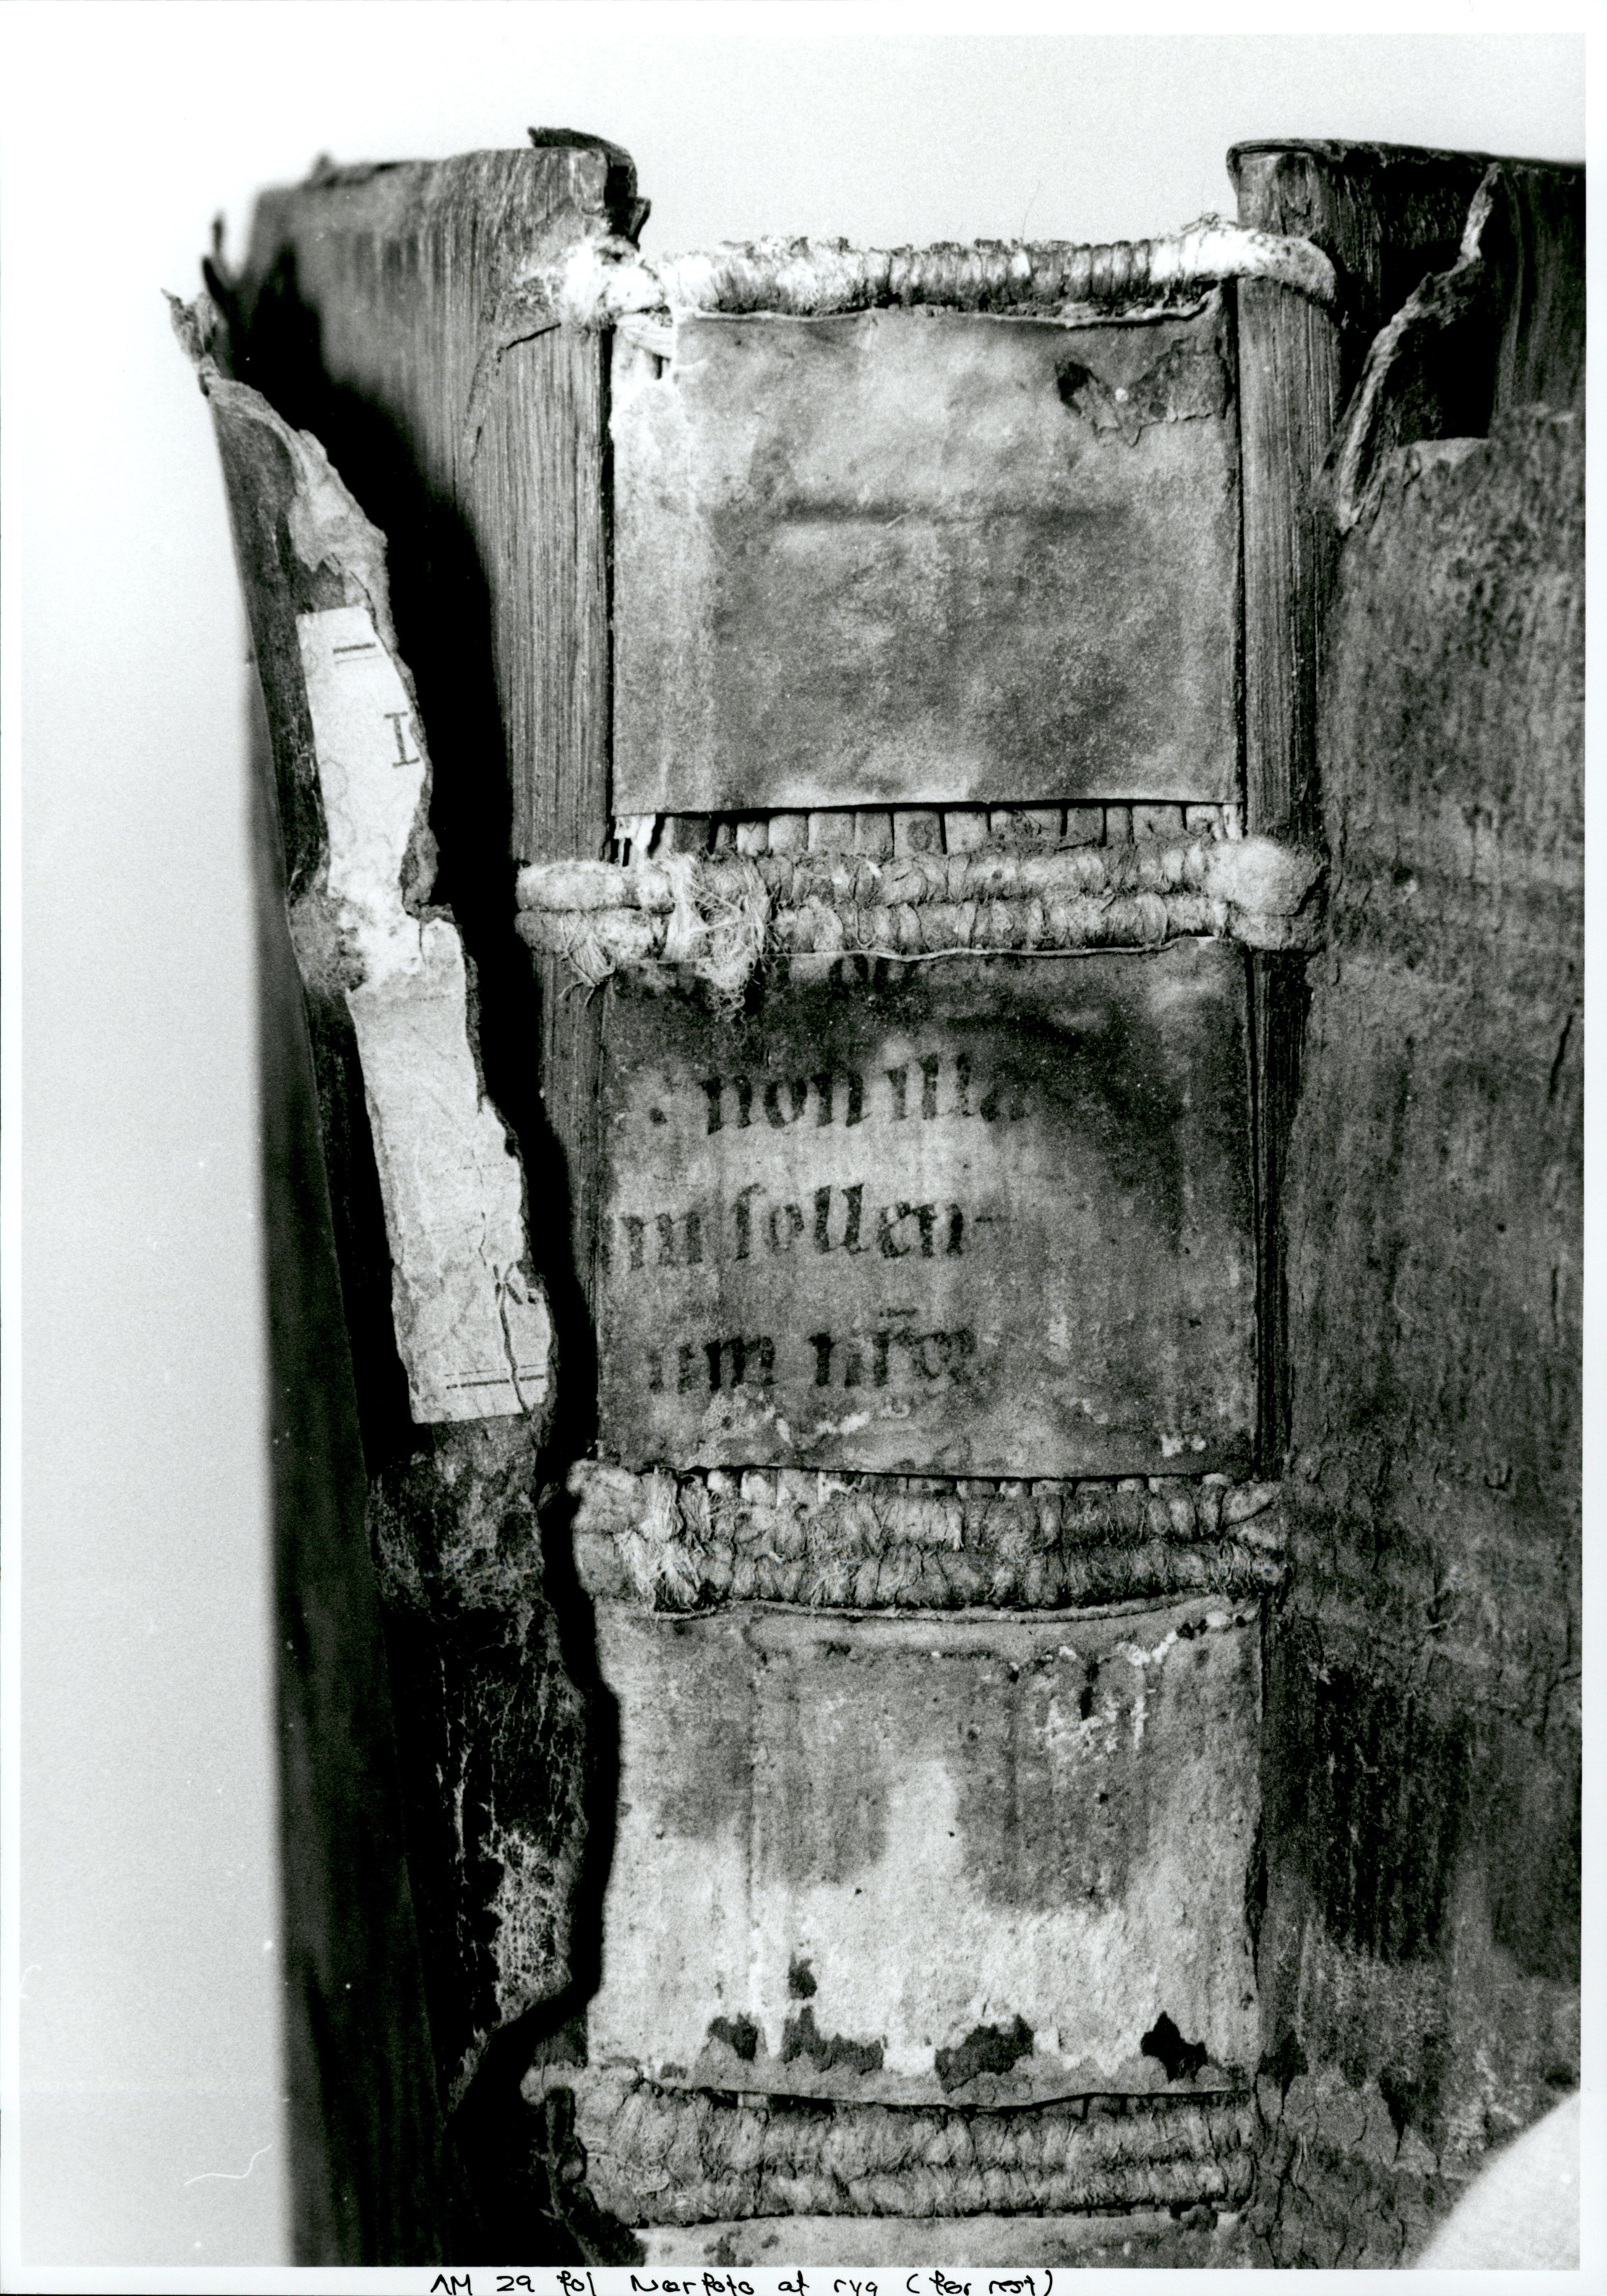 Image of book spine (Digital Collections)